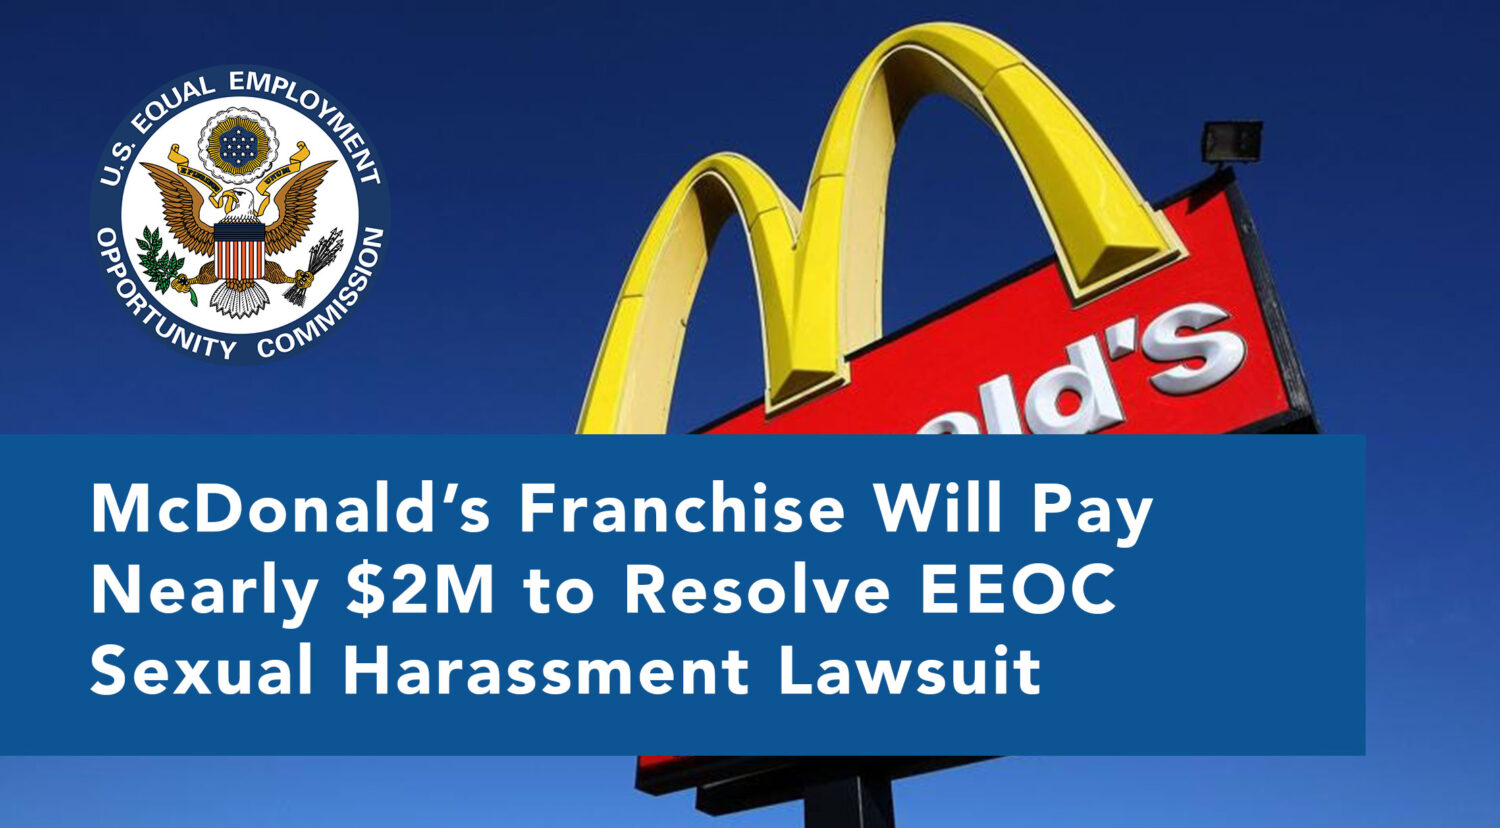 McDonald's to pay nearly $2M to resolve lawsuit